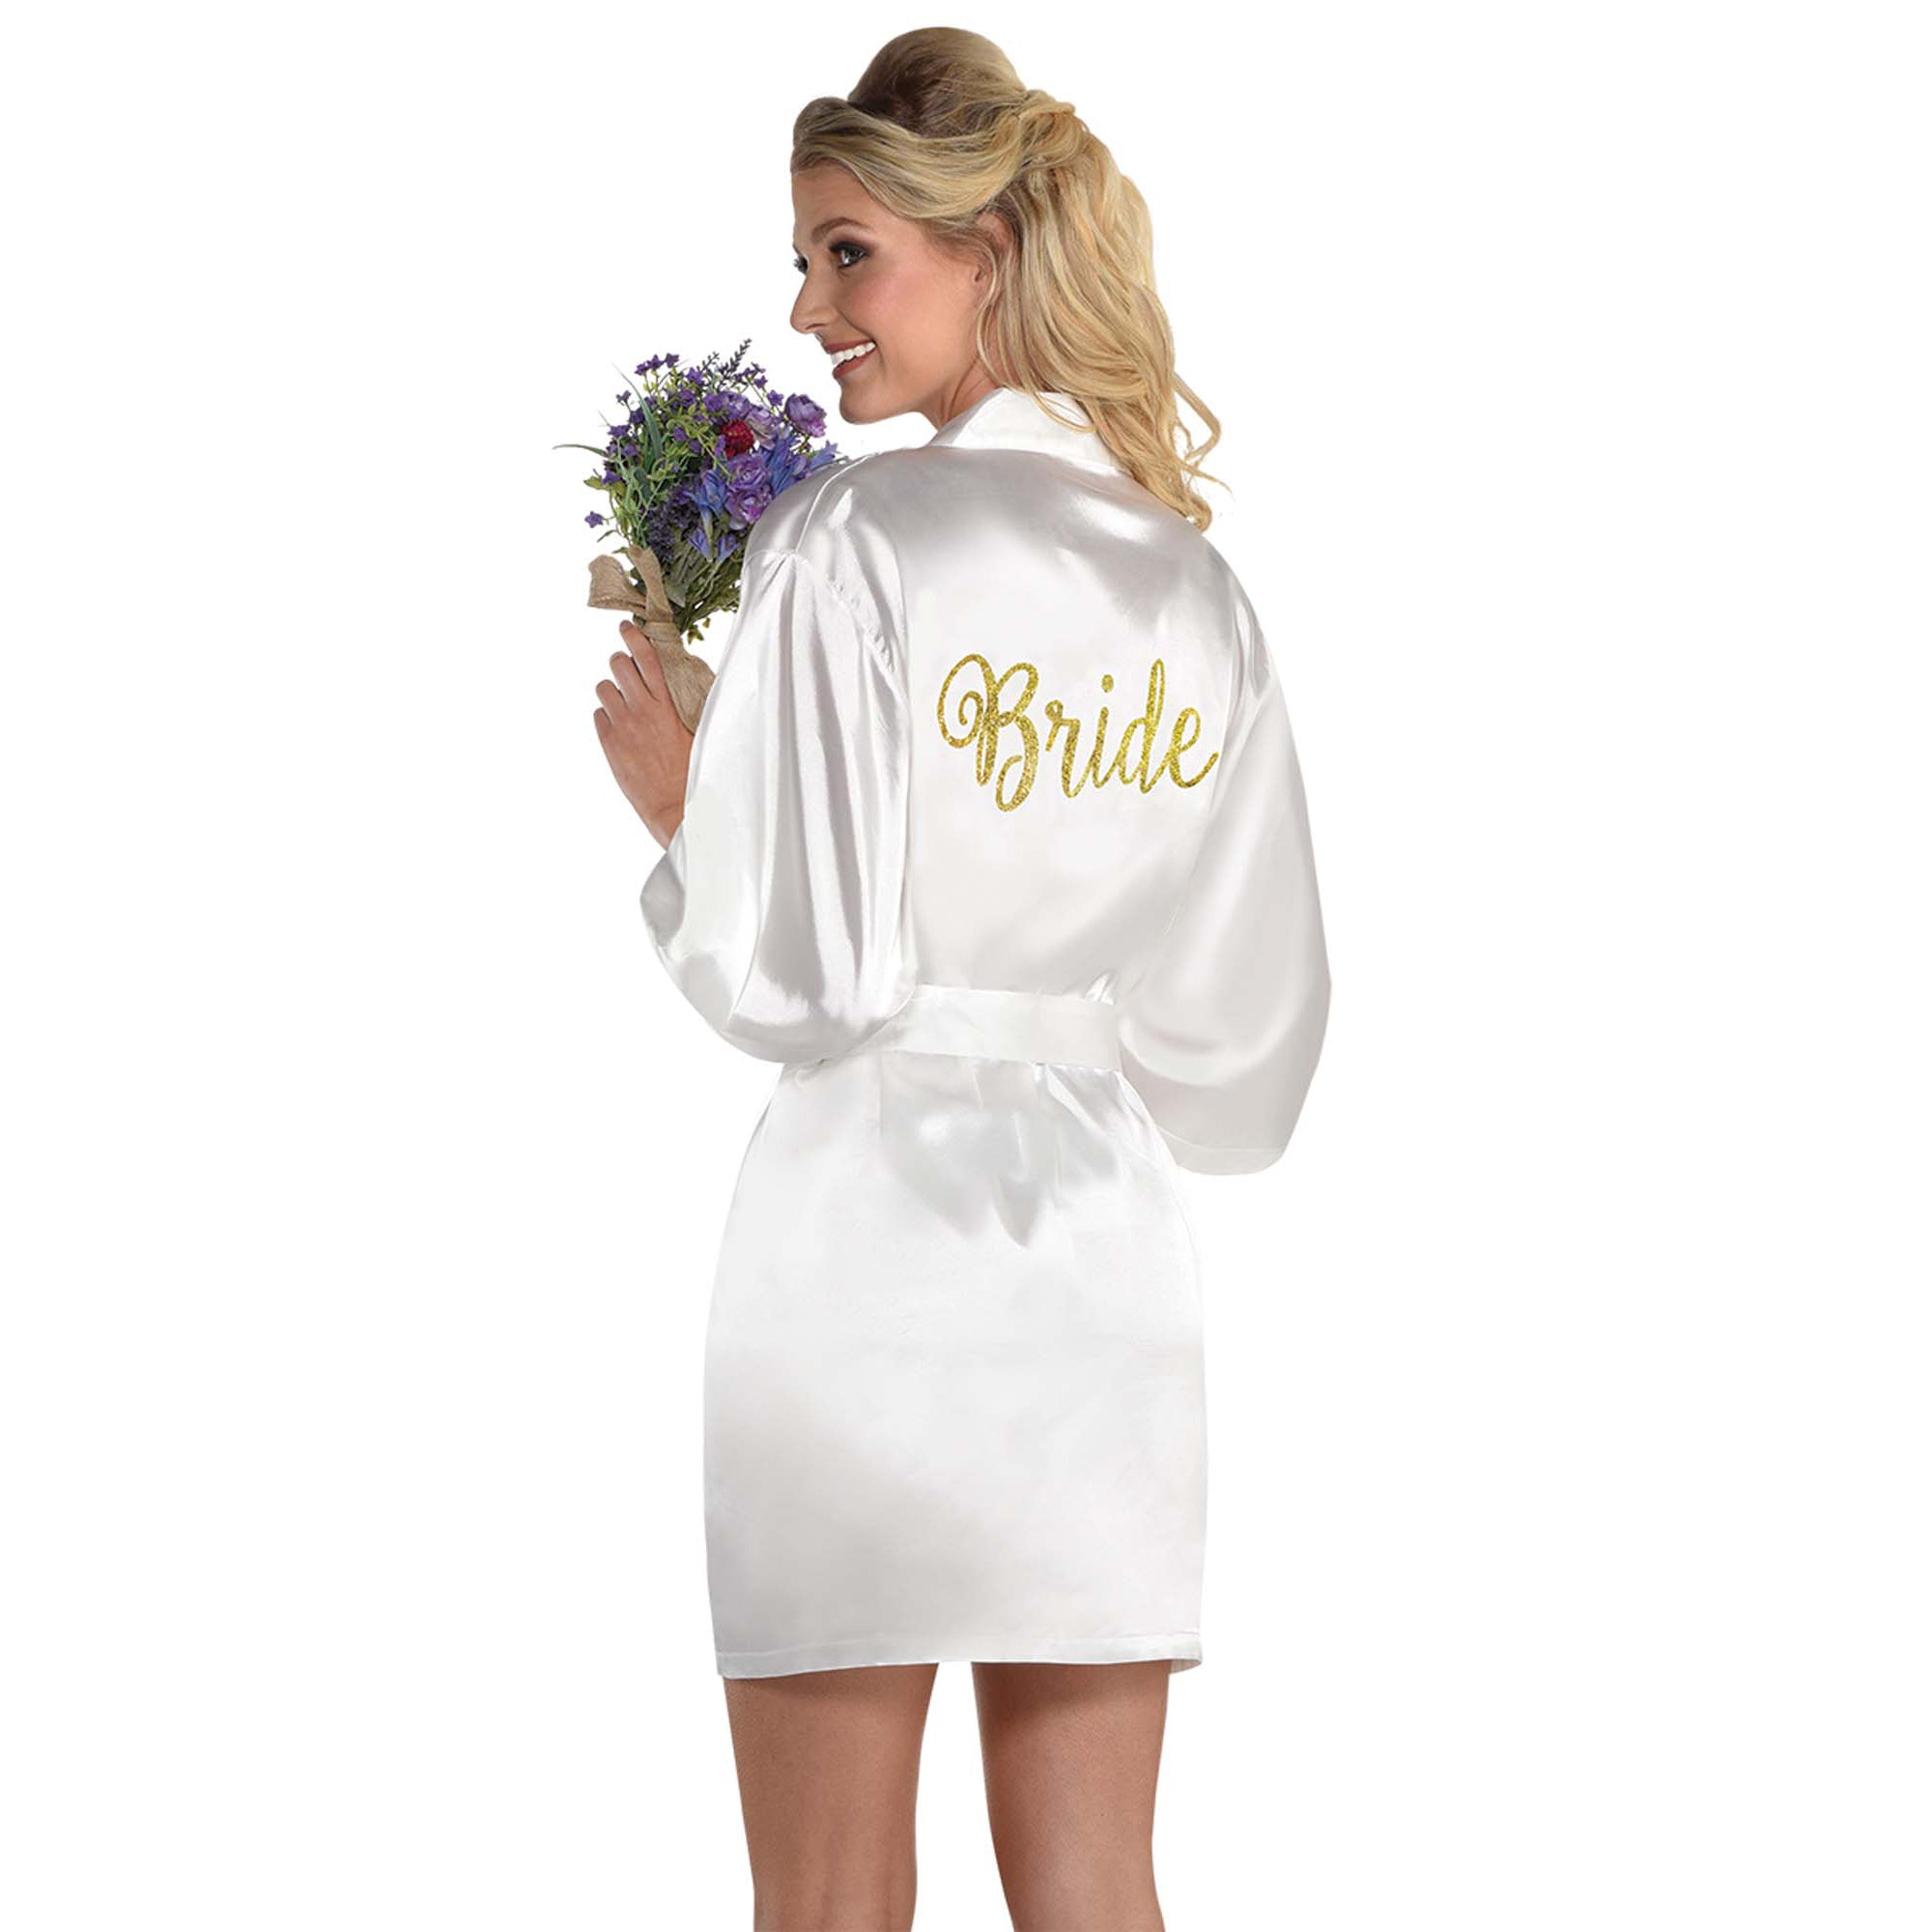 Adult Brides Robe Hot Stamped Fabric